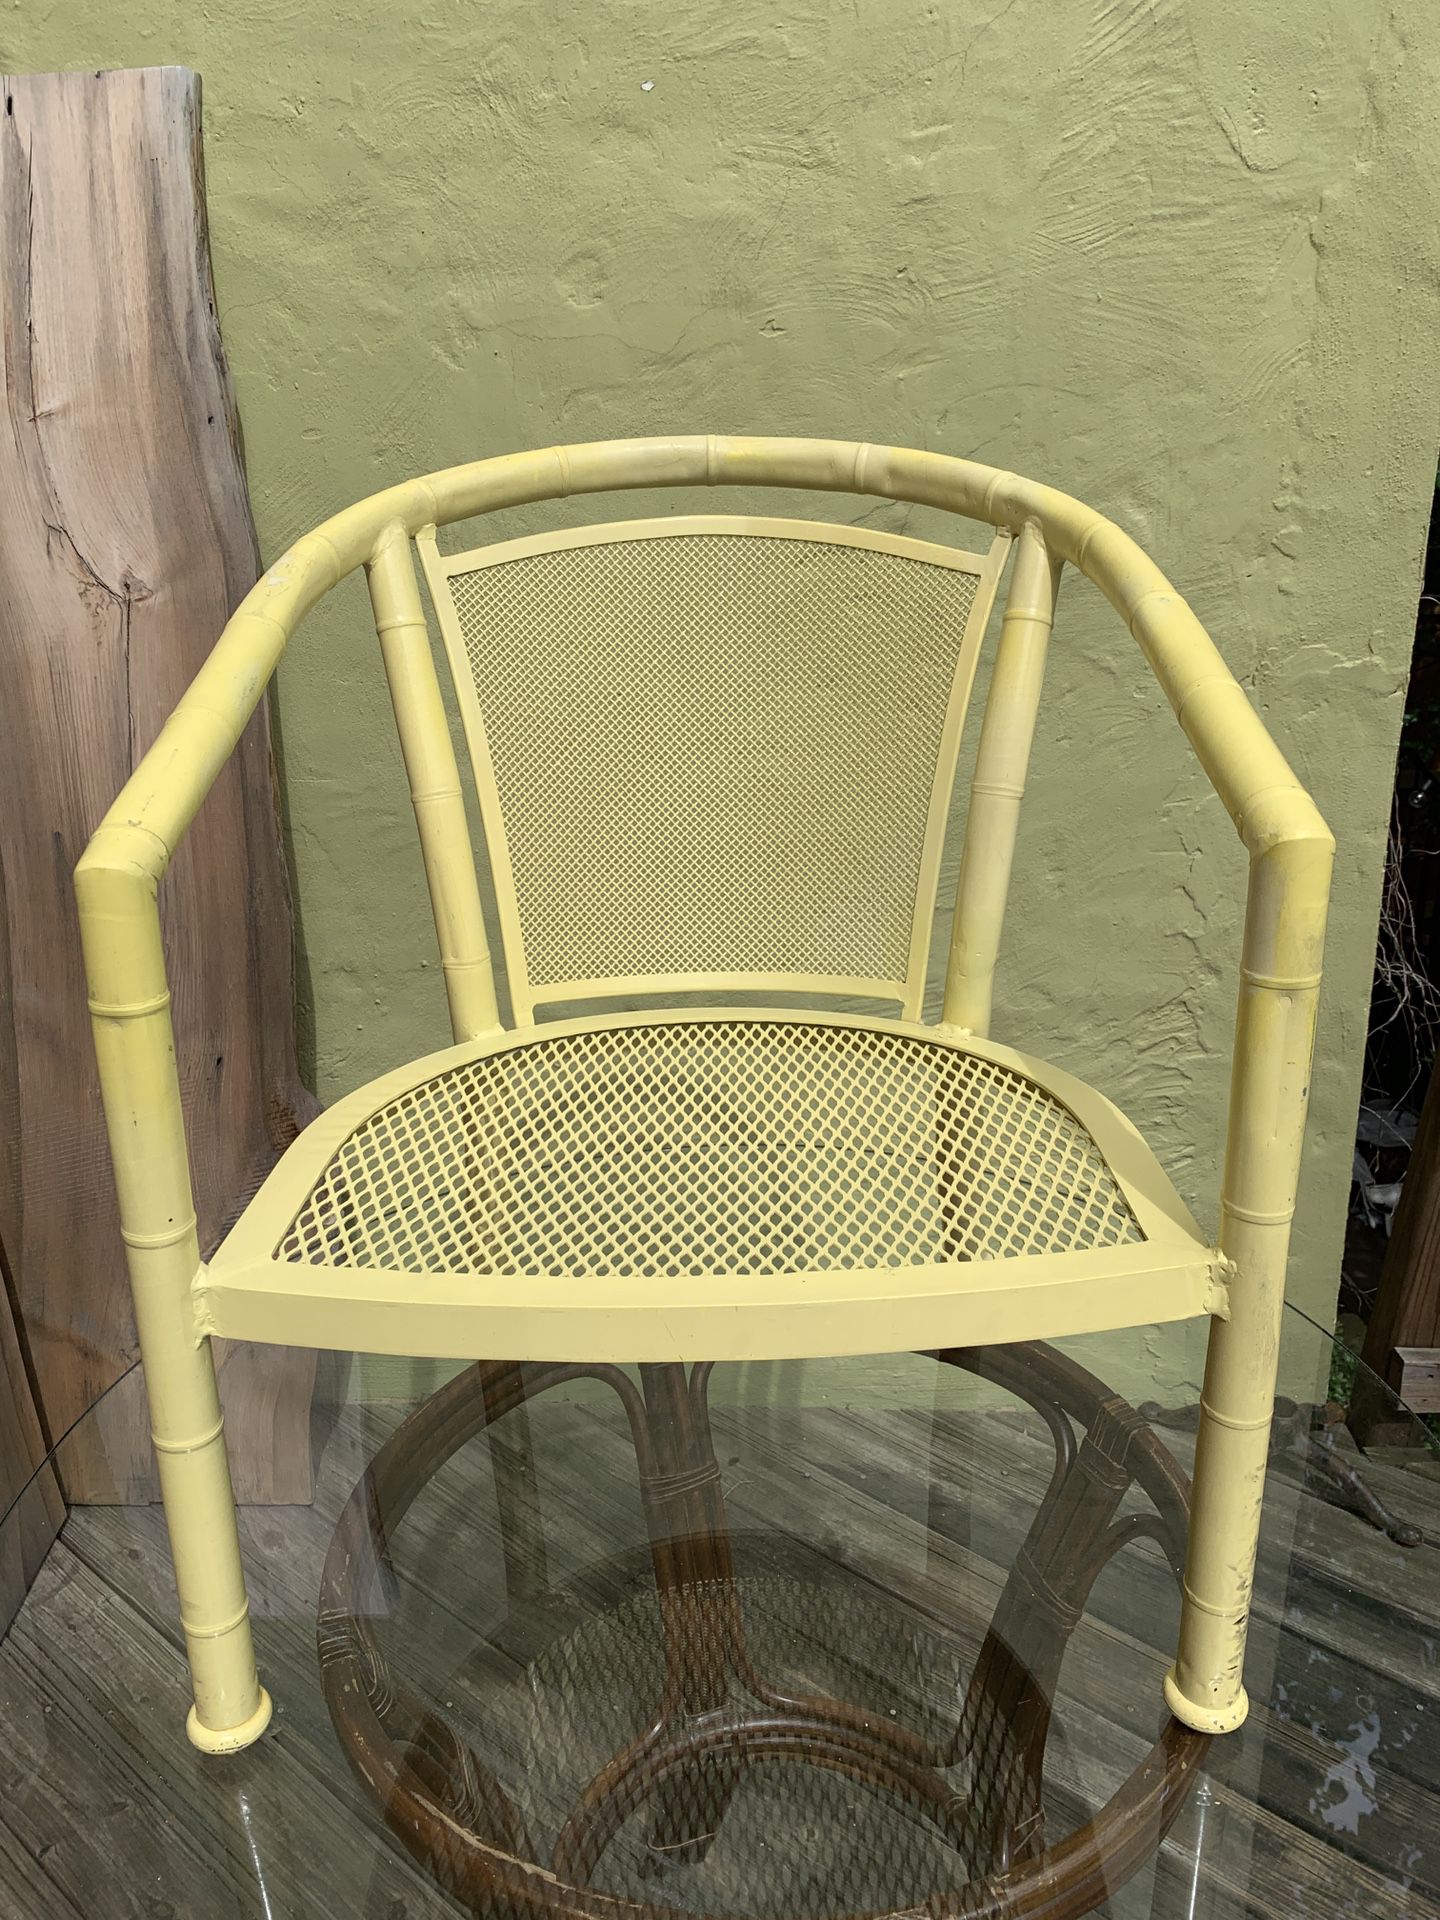 Vintage metal patio chair - faux bamboo style